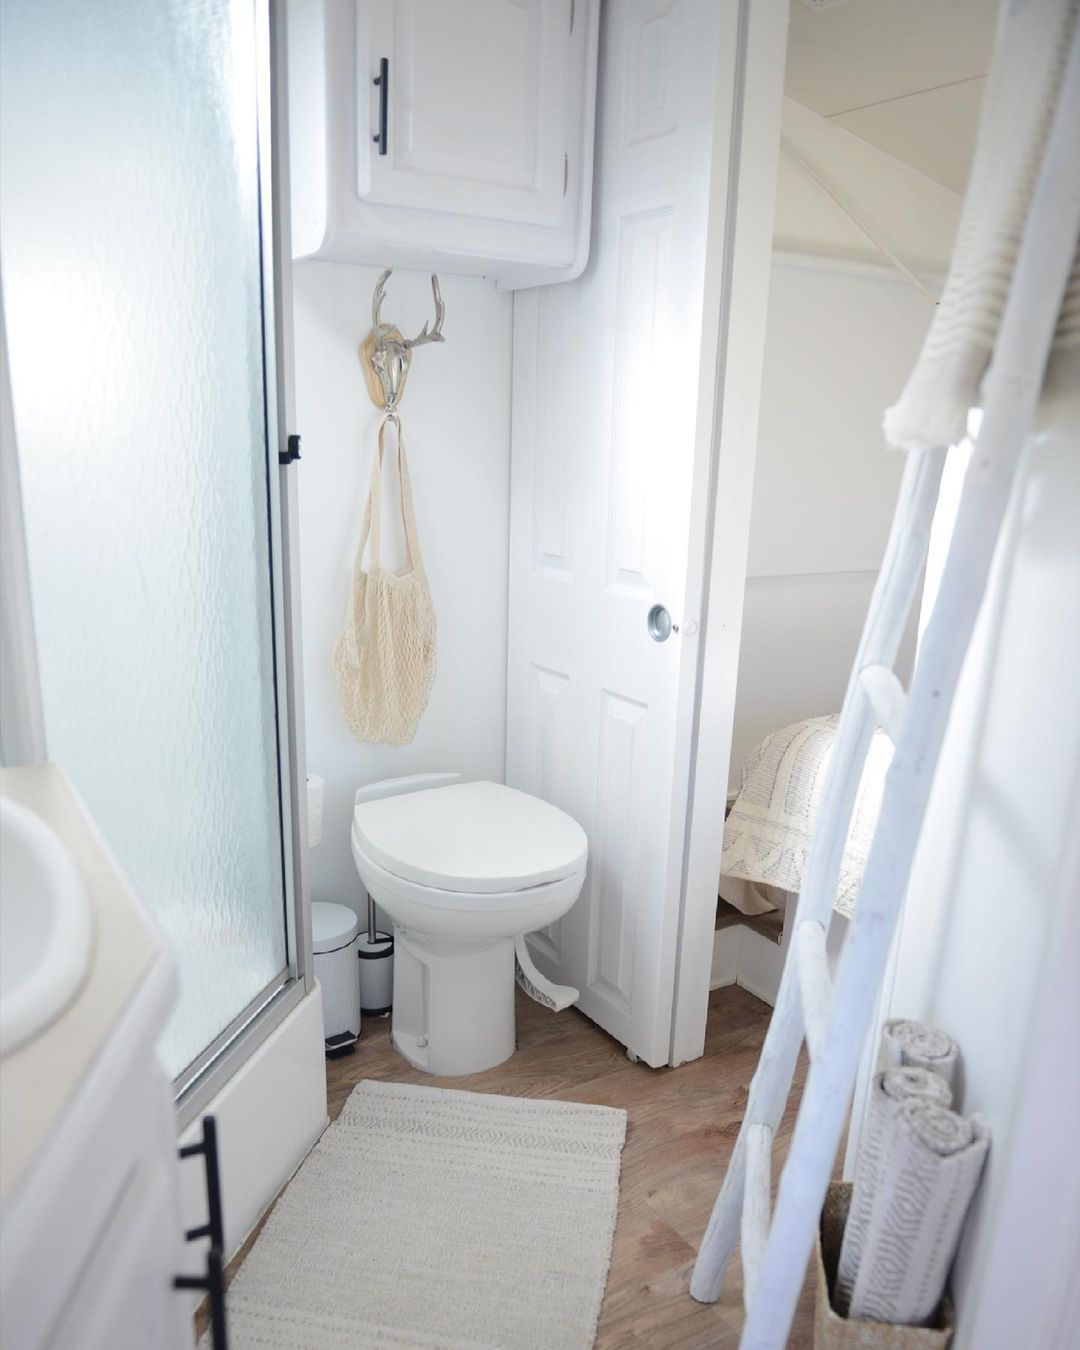 RV bathroom featuring toilet, cabinets, and stand-up shower. Photo by Instagram user @micasaesyuccasa.